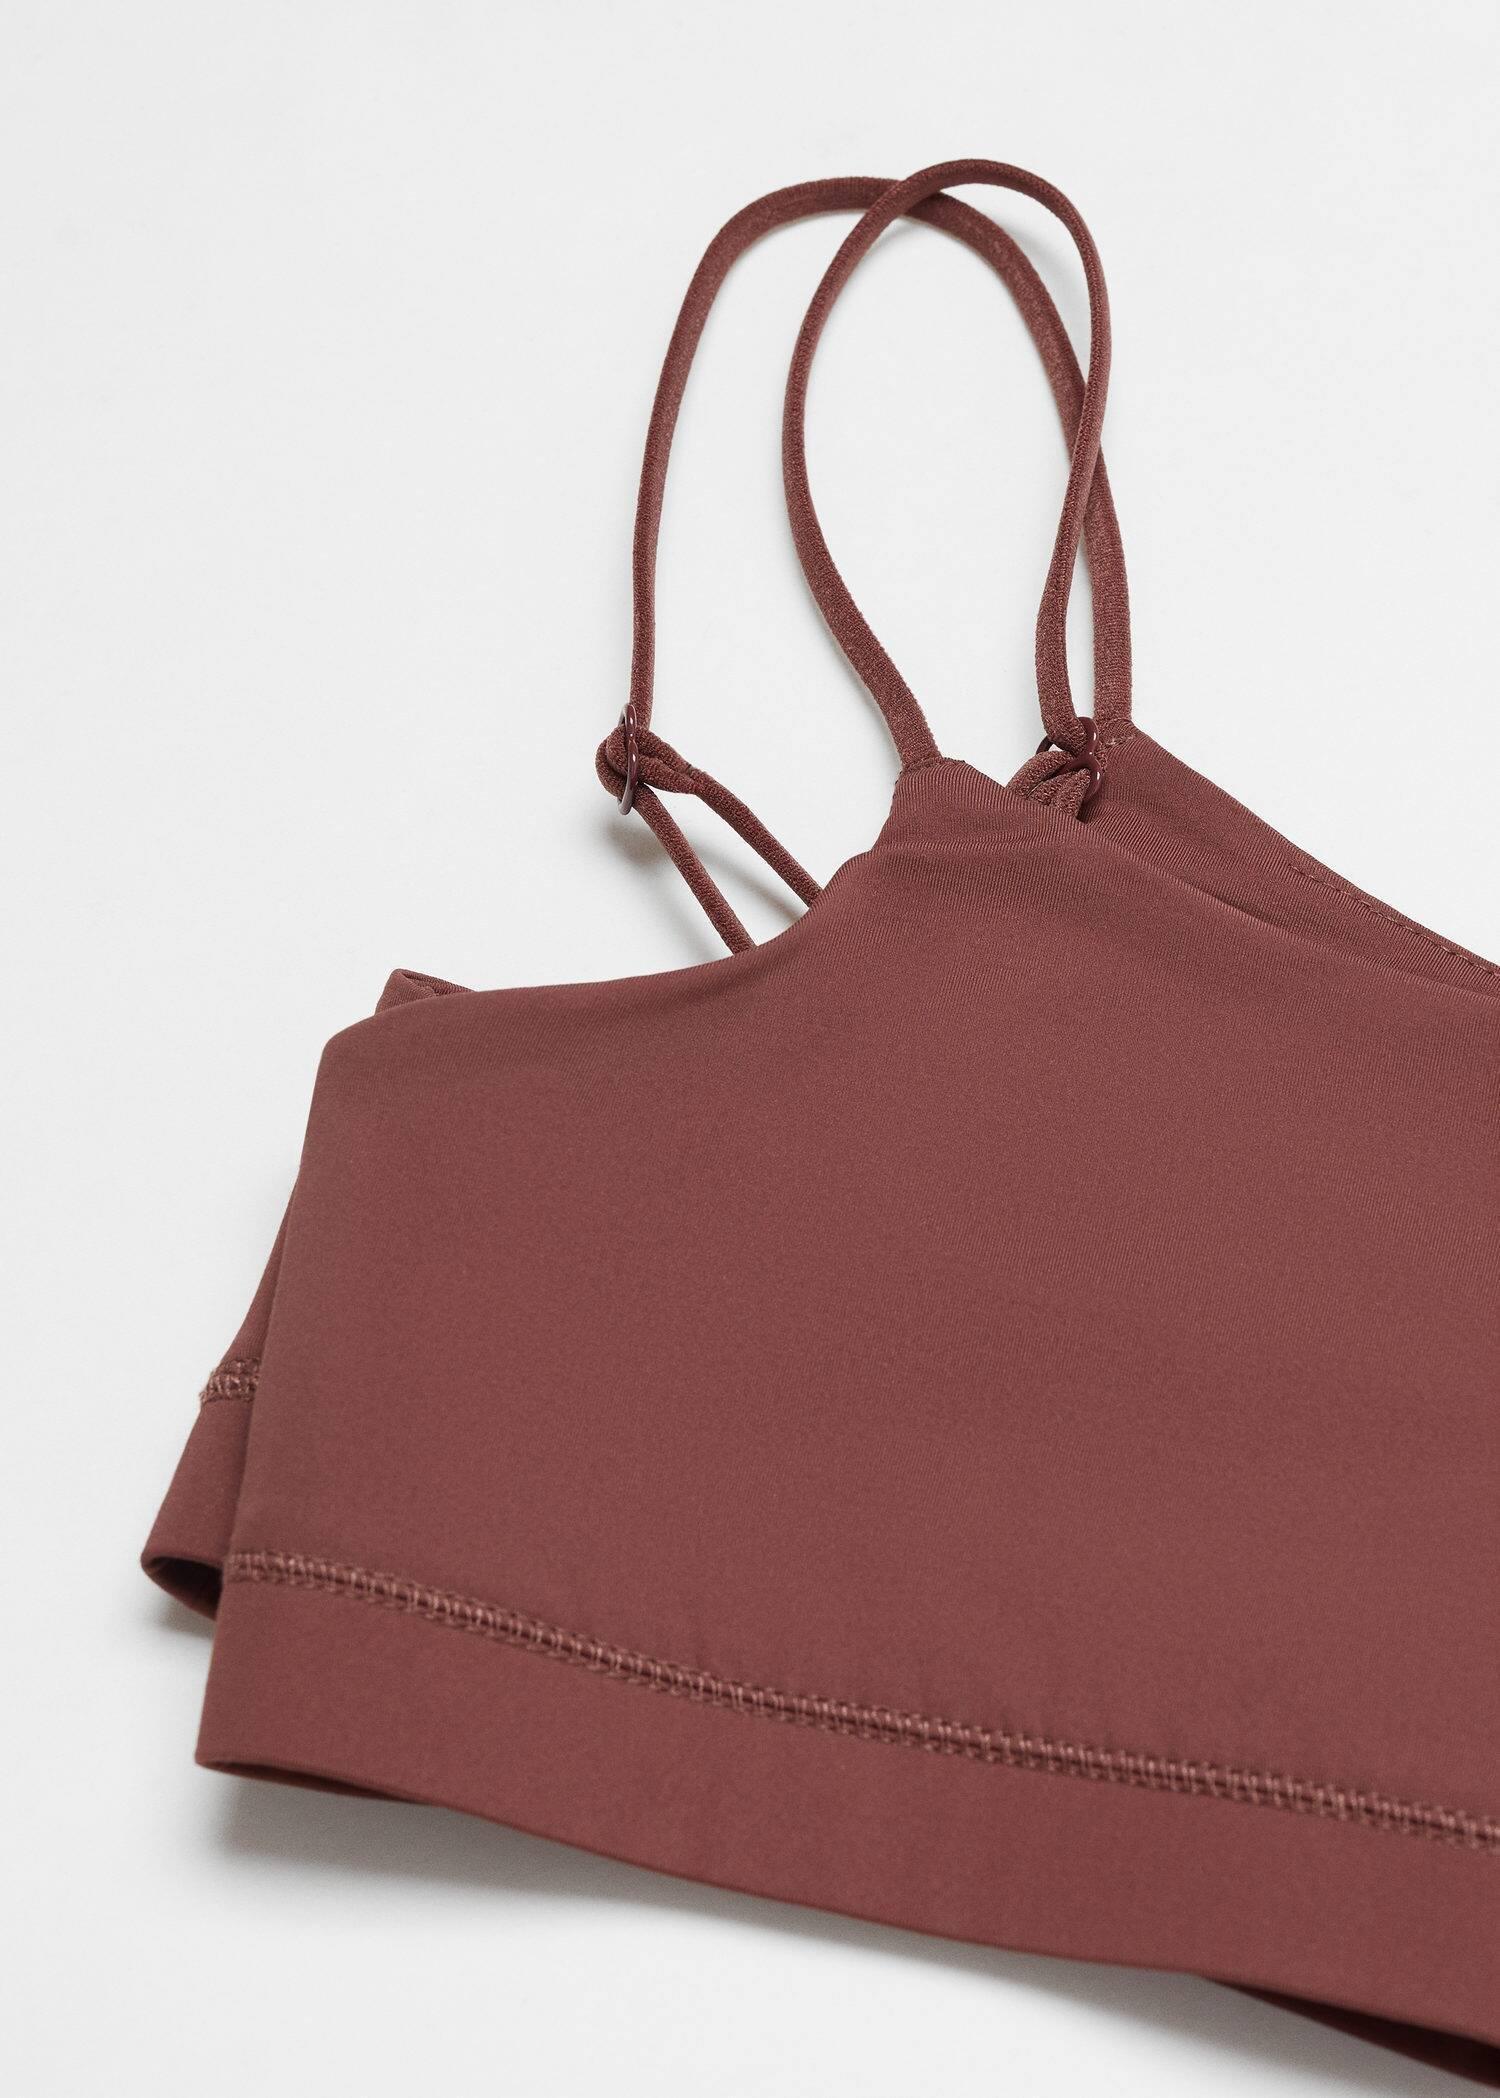 Mango - Brown Cropped Top With Thin Straps